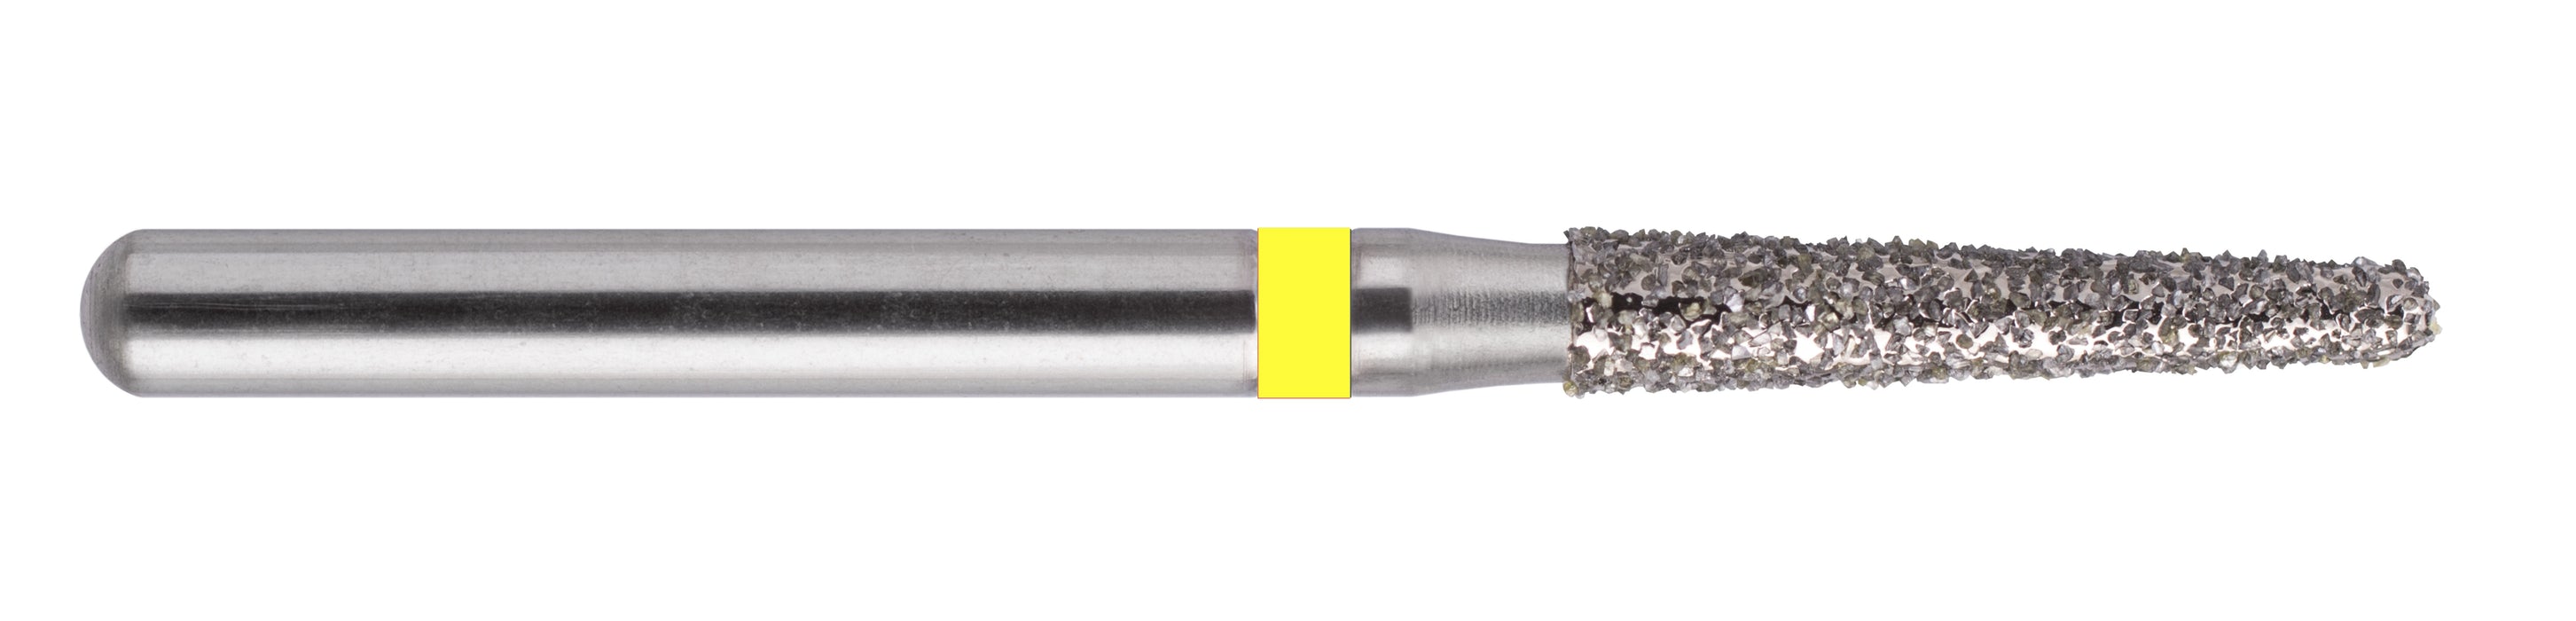 856 - Cone with rounded end